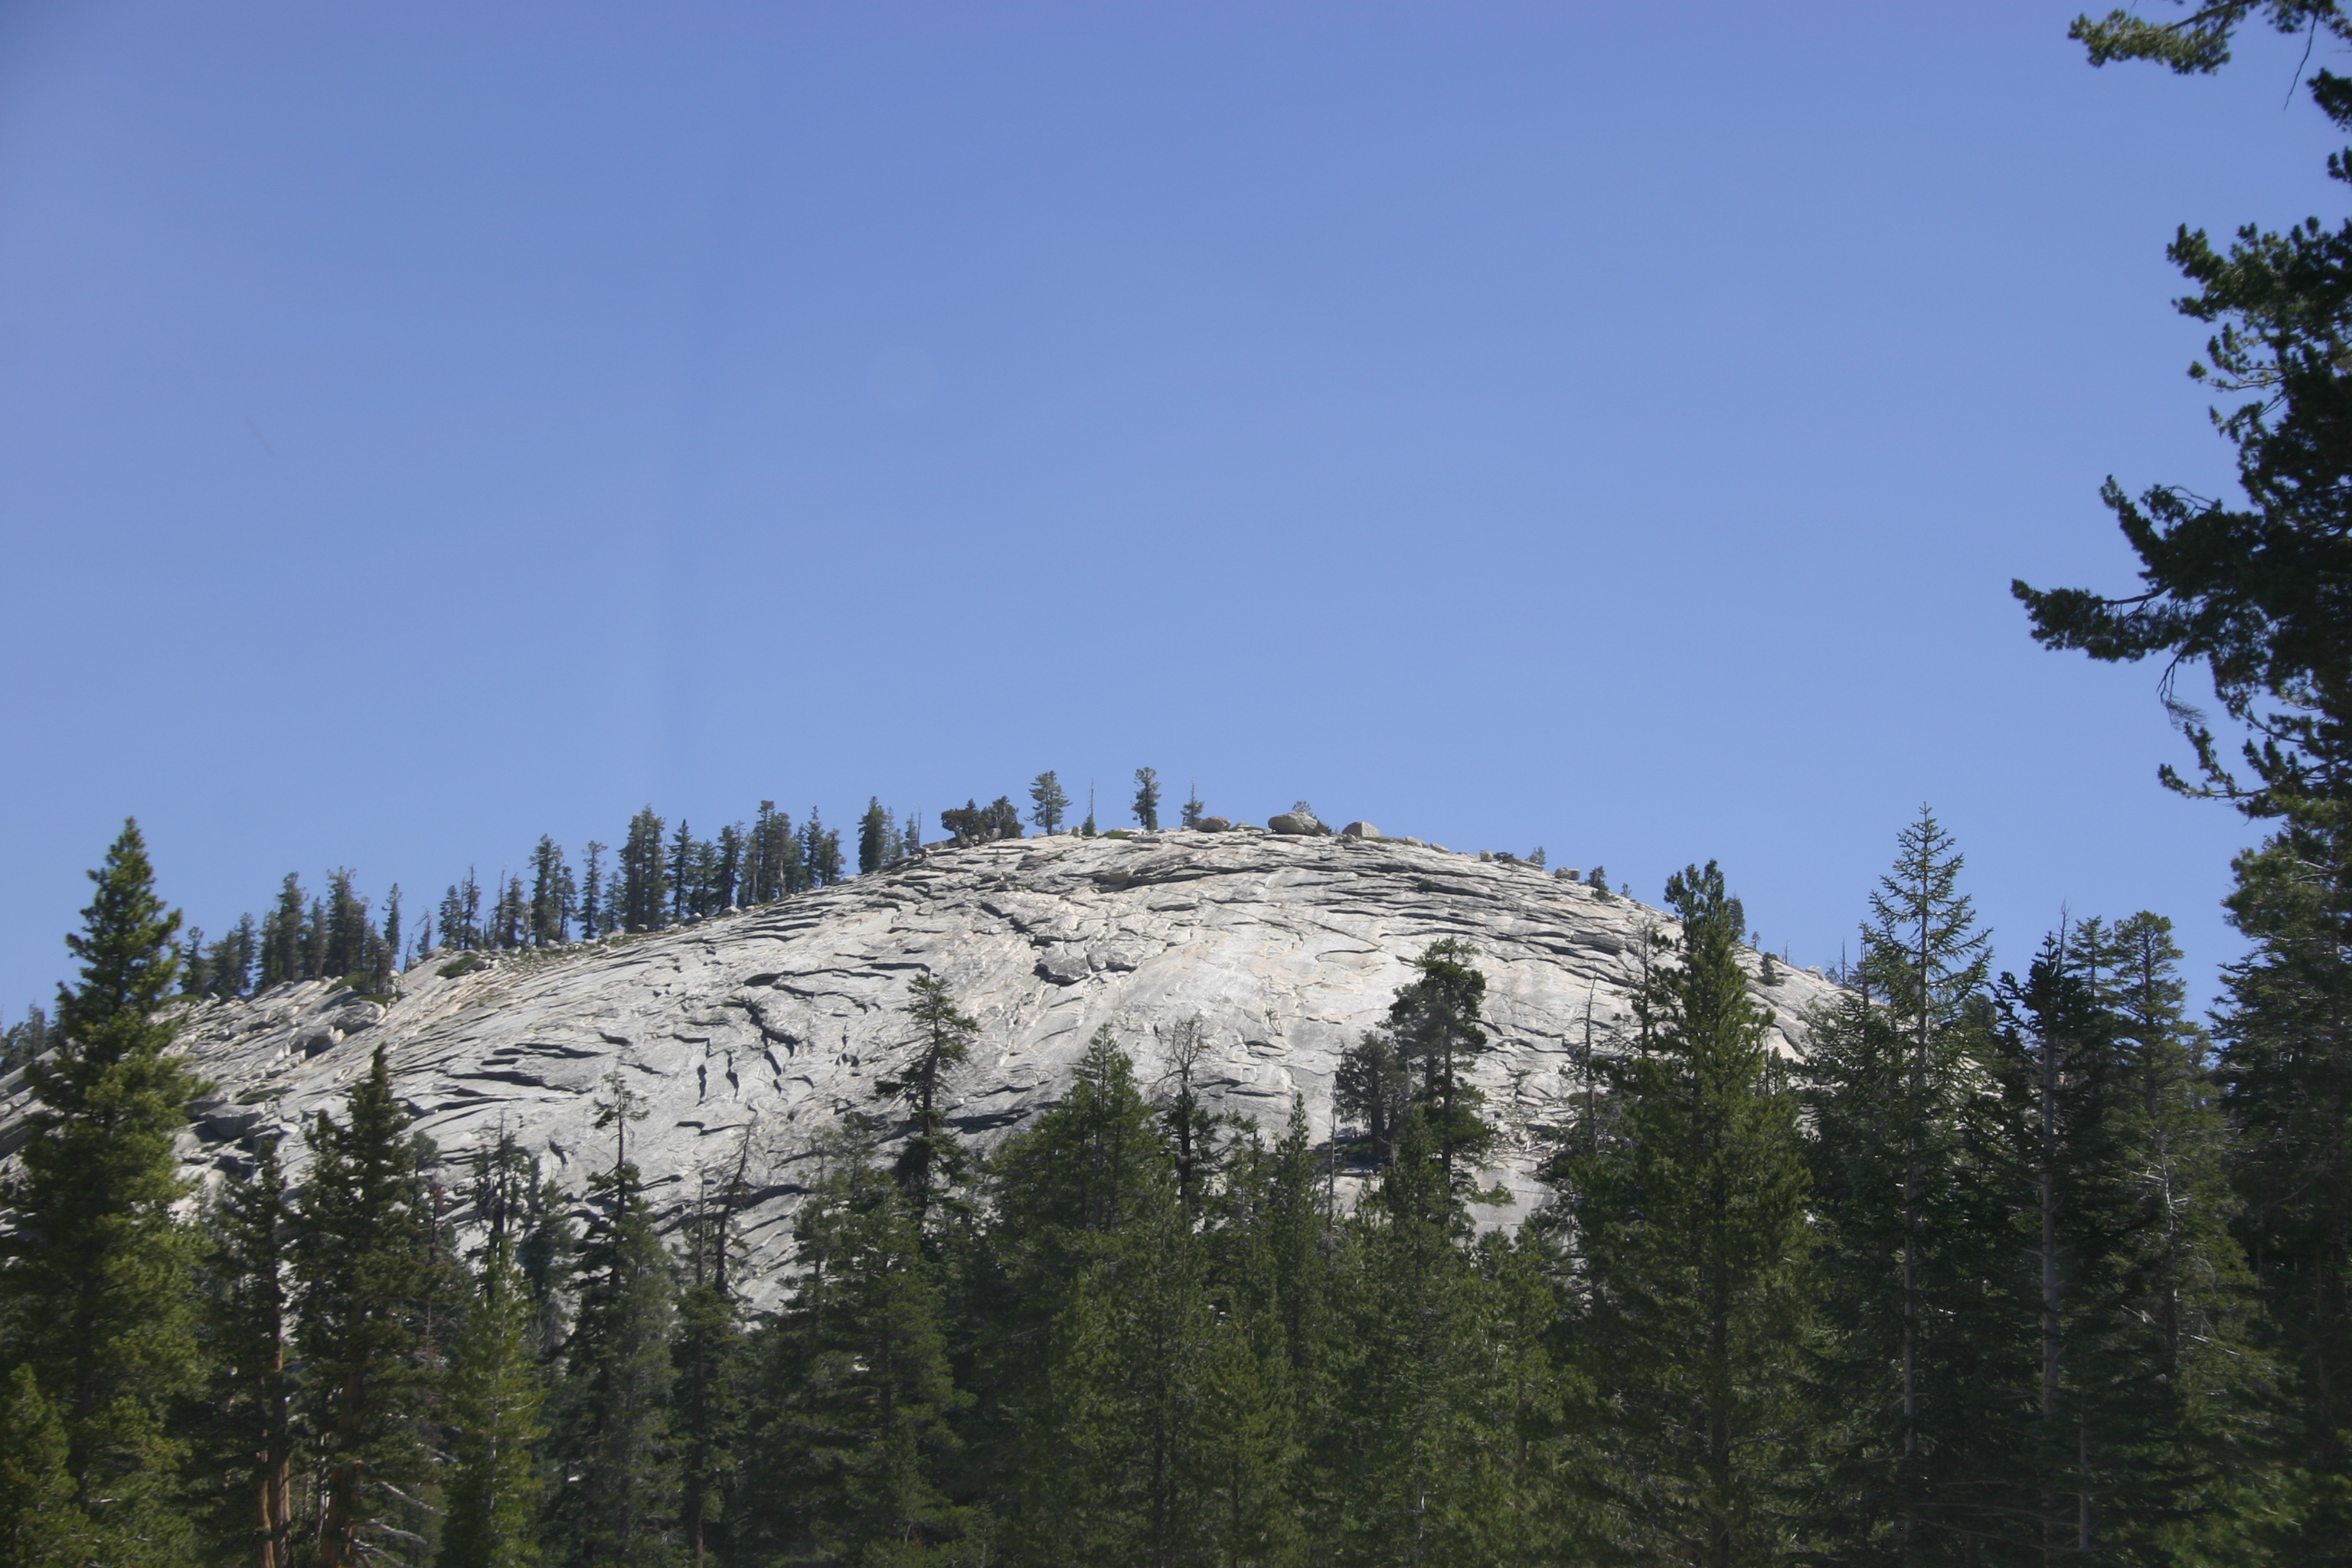 Strange and wonderful geology in the northern part of Yosemite National Park, from Hwy 120. 